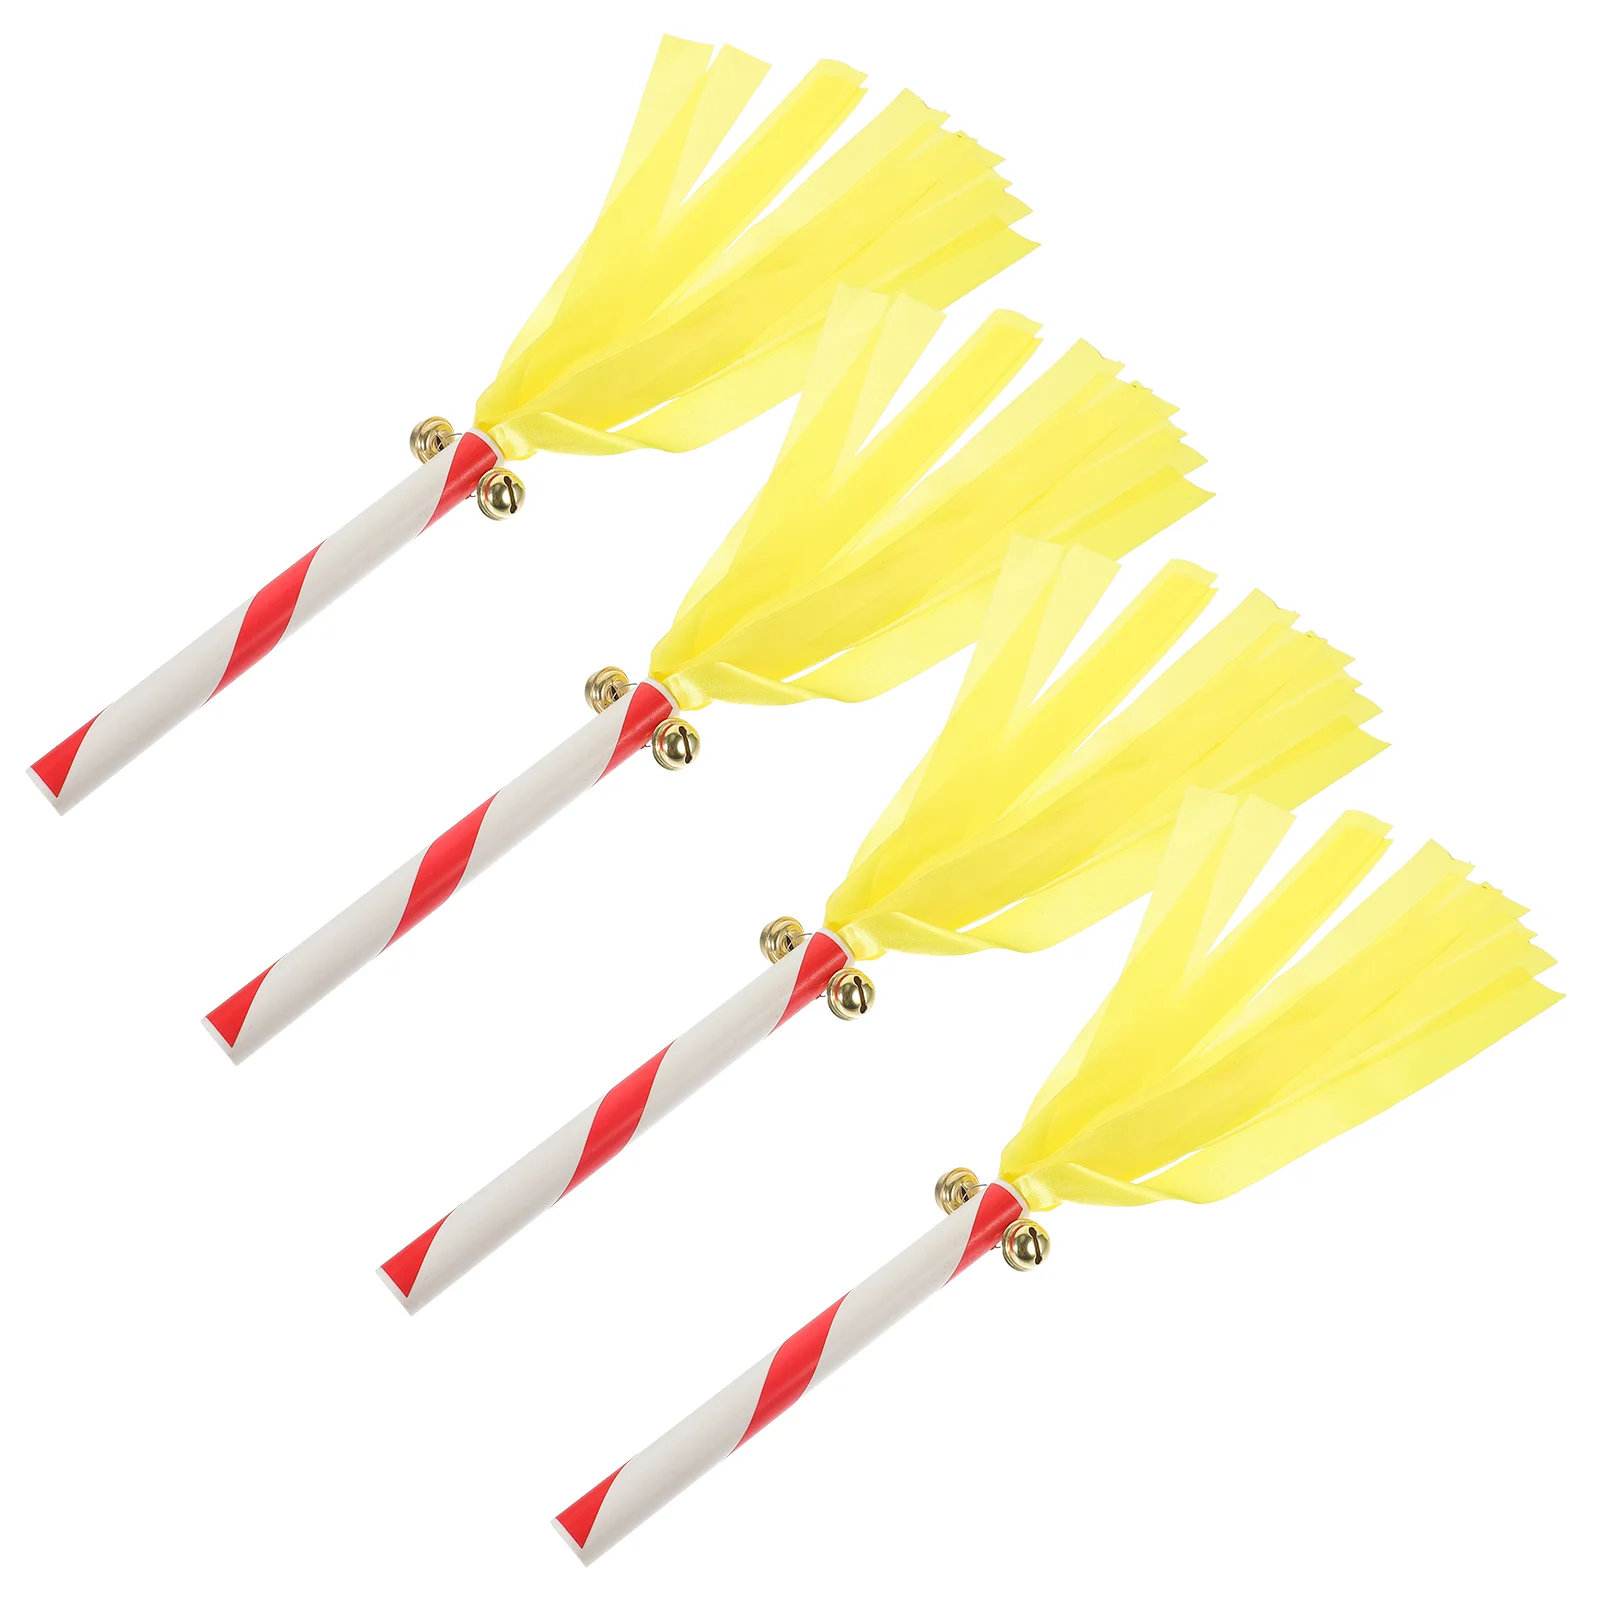 4Pcs Party Favors Cheer Leading Favors Thunder Sticks Thunder Stick Props Cheerleading Pompom 4pcs dance pompoms cheering pompoms gymnastics cheer pompom cheerleading props